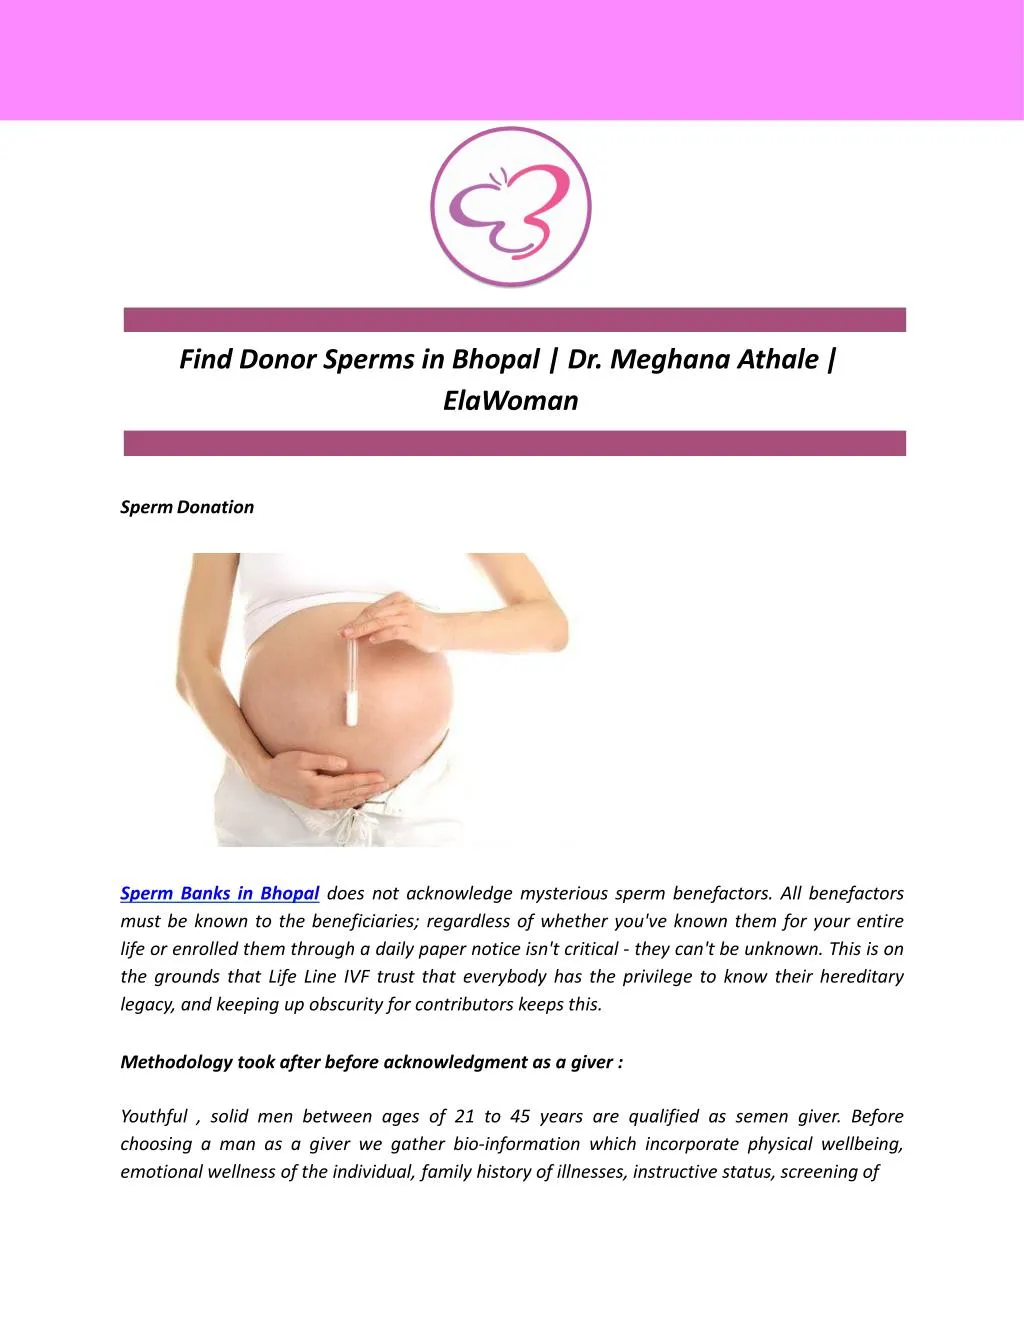 find donor sperms in bhopal dr meghana athale